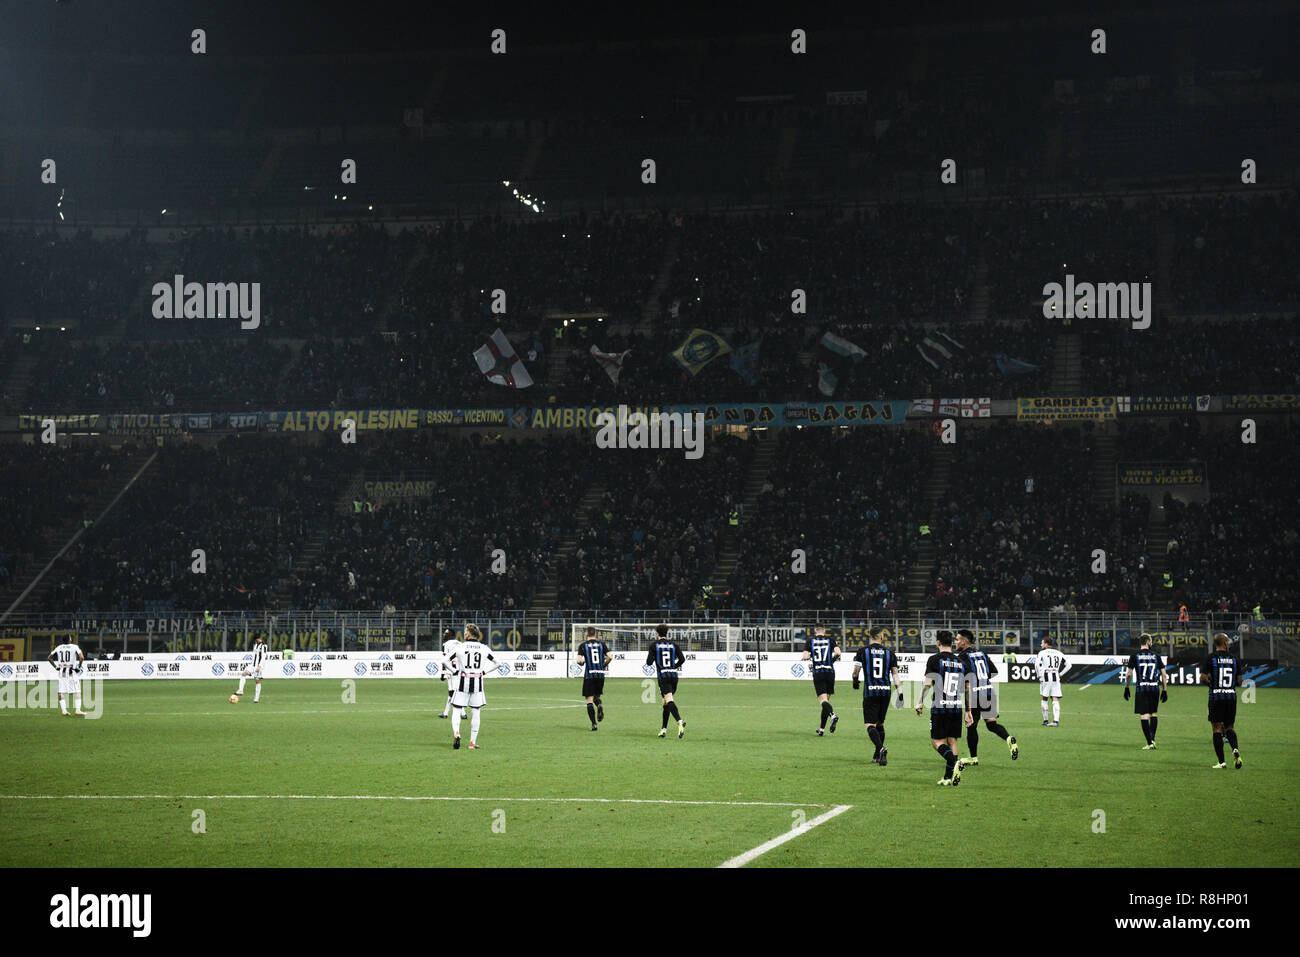 Udinese Calcio High Resolution Stock Photography and Images - Alamy